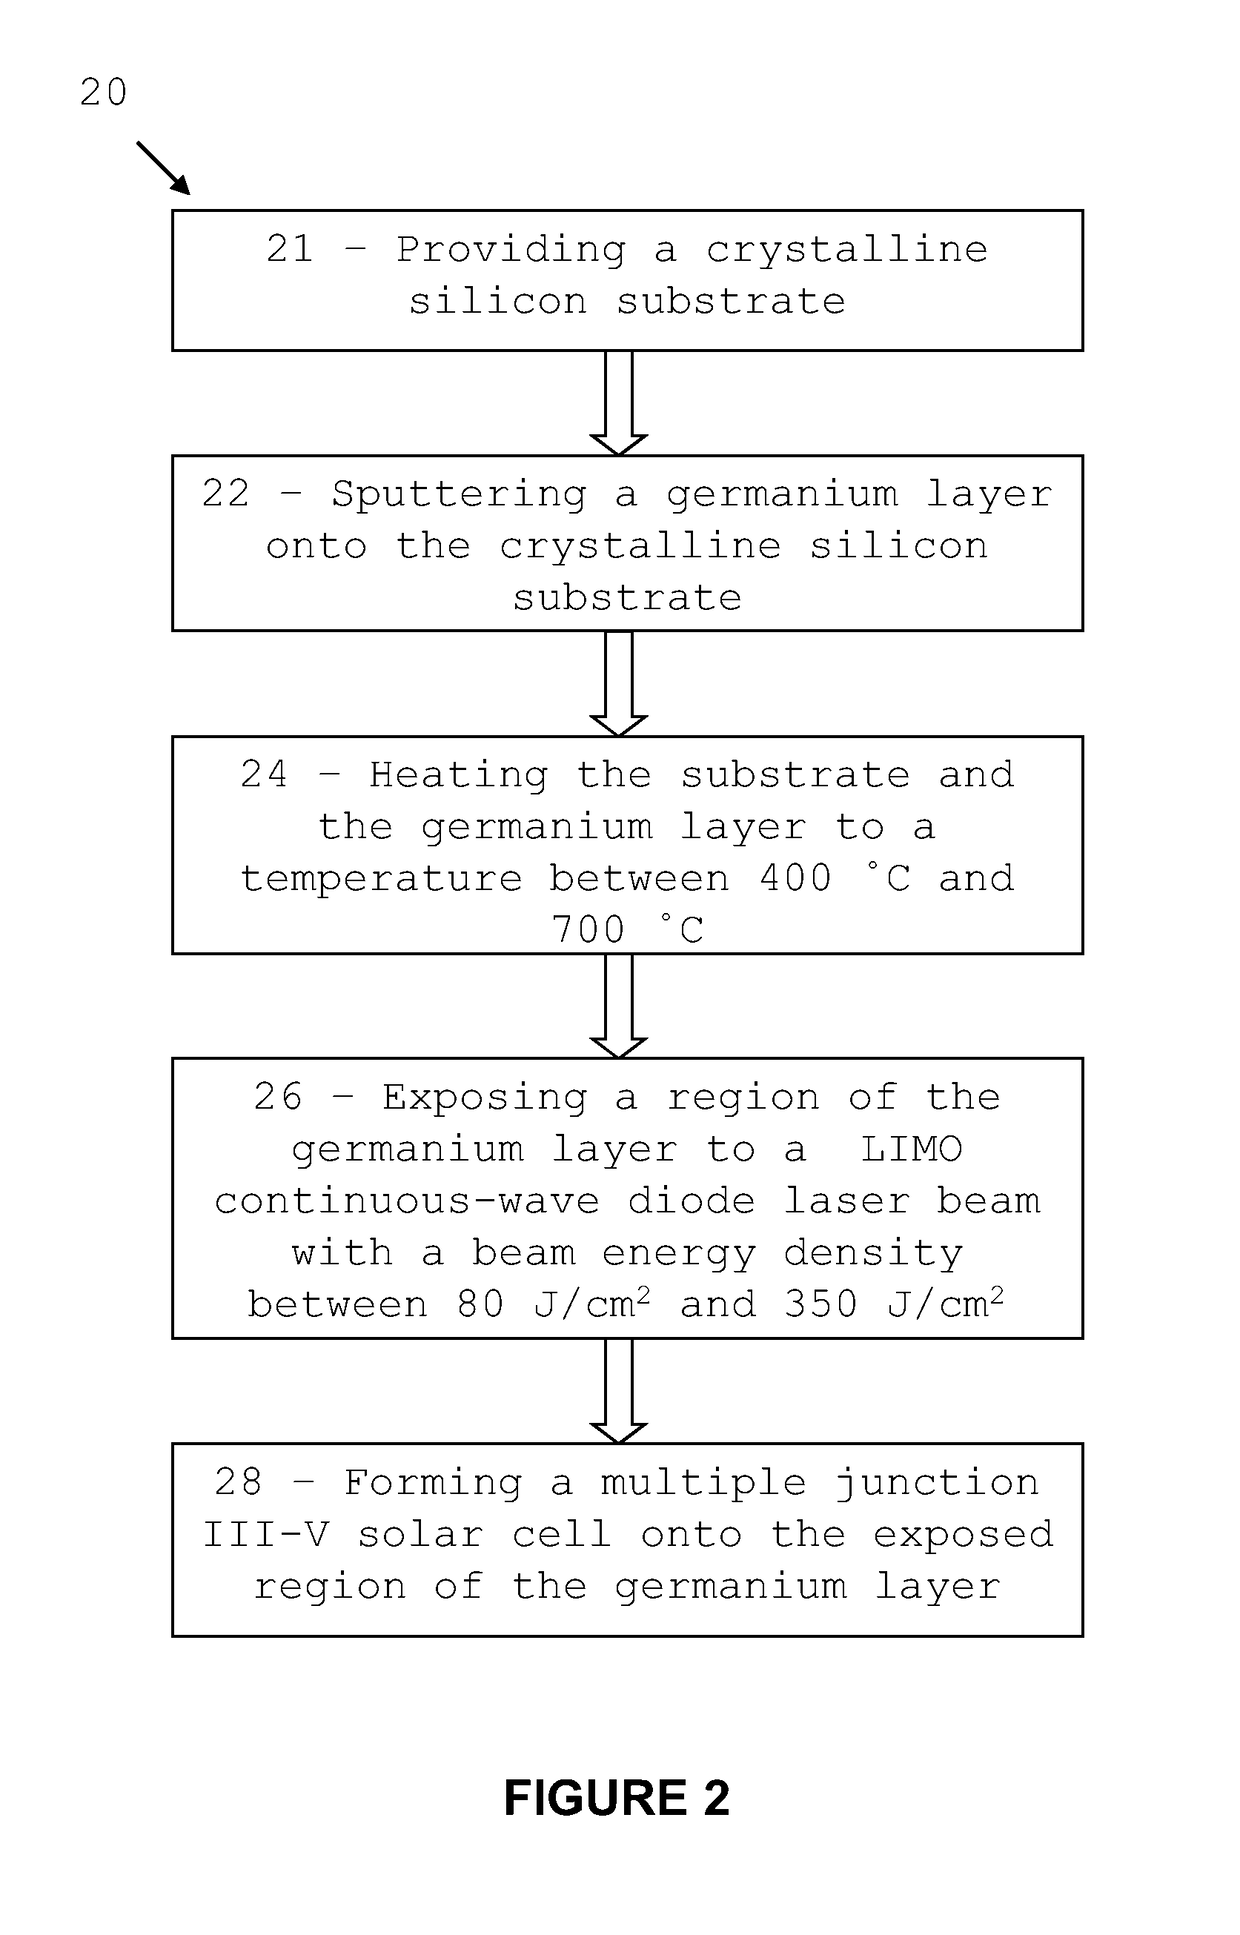 A method for forming a virtual germanium substrate using a laser